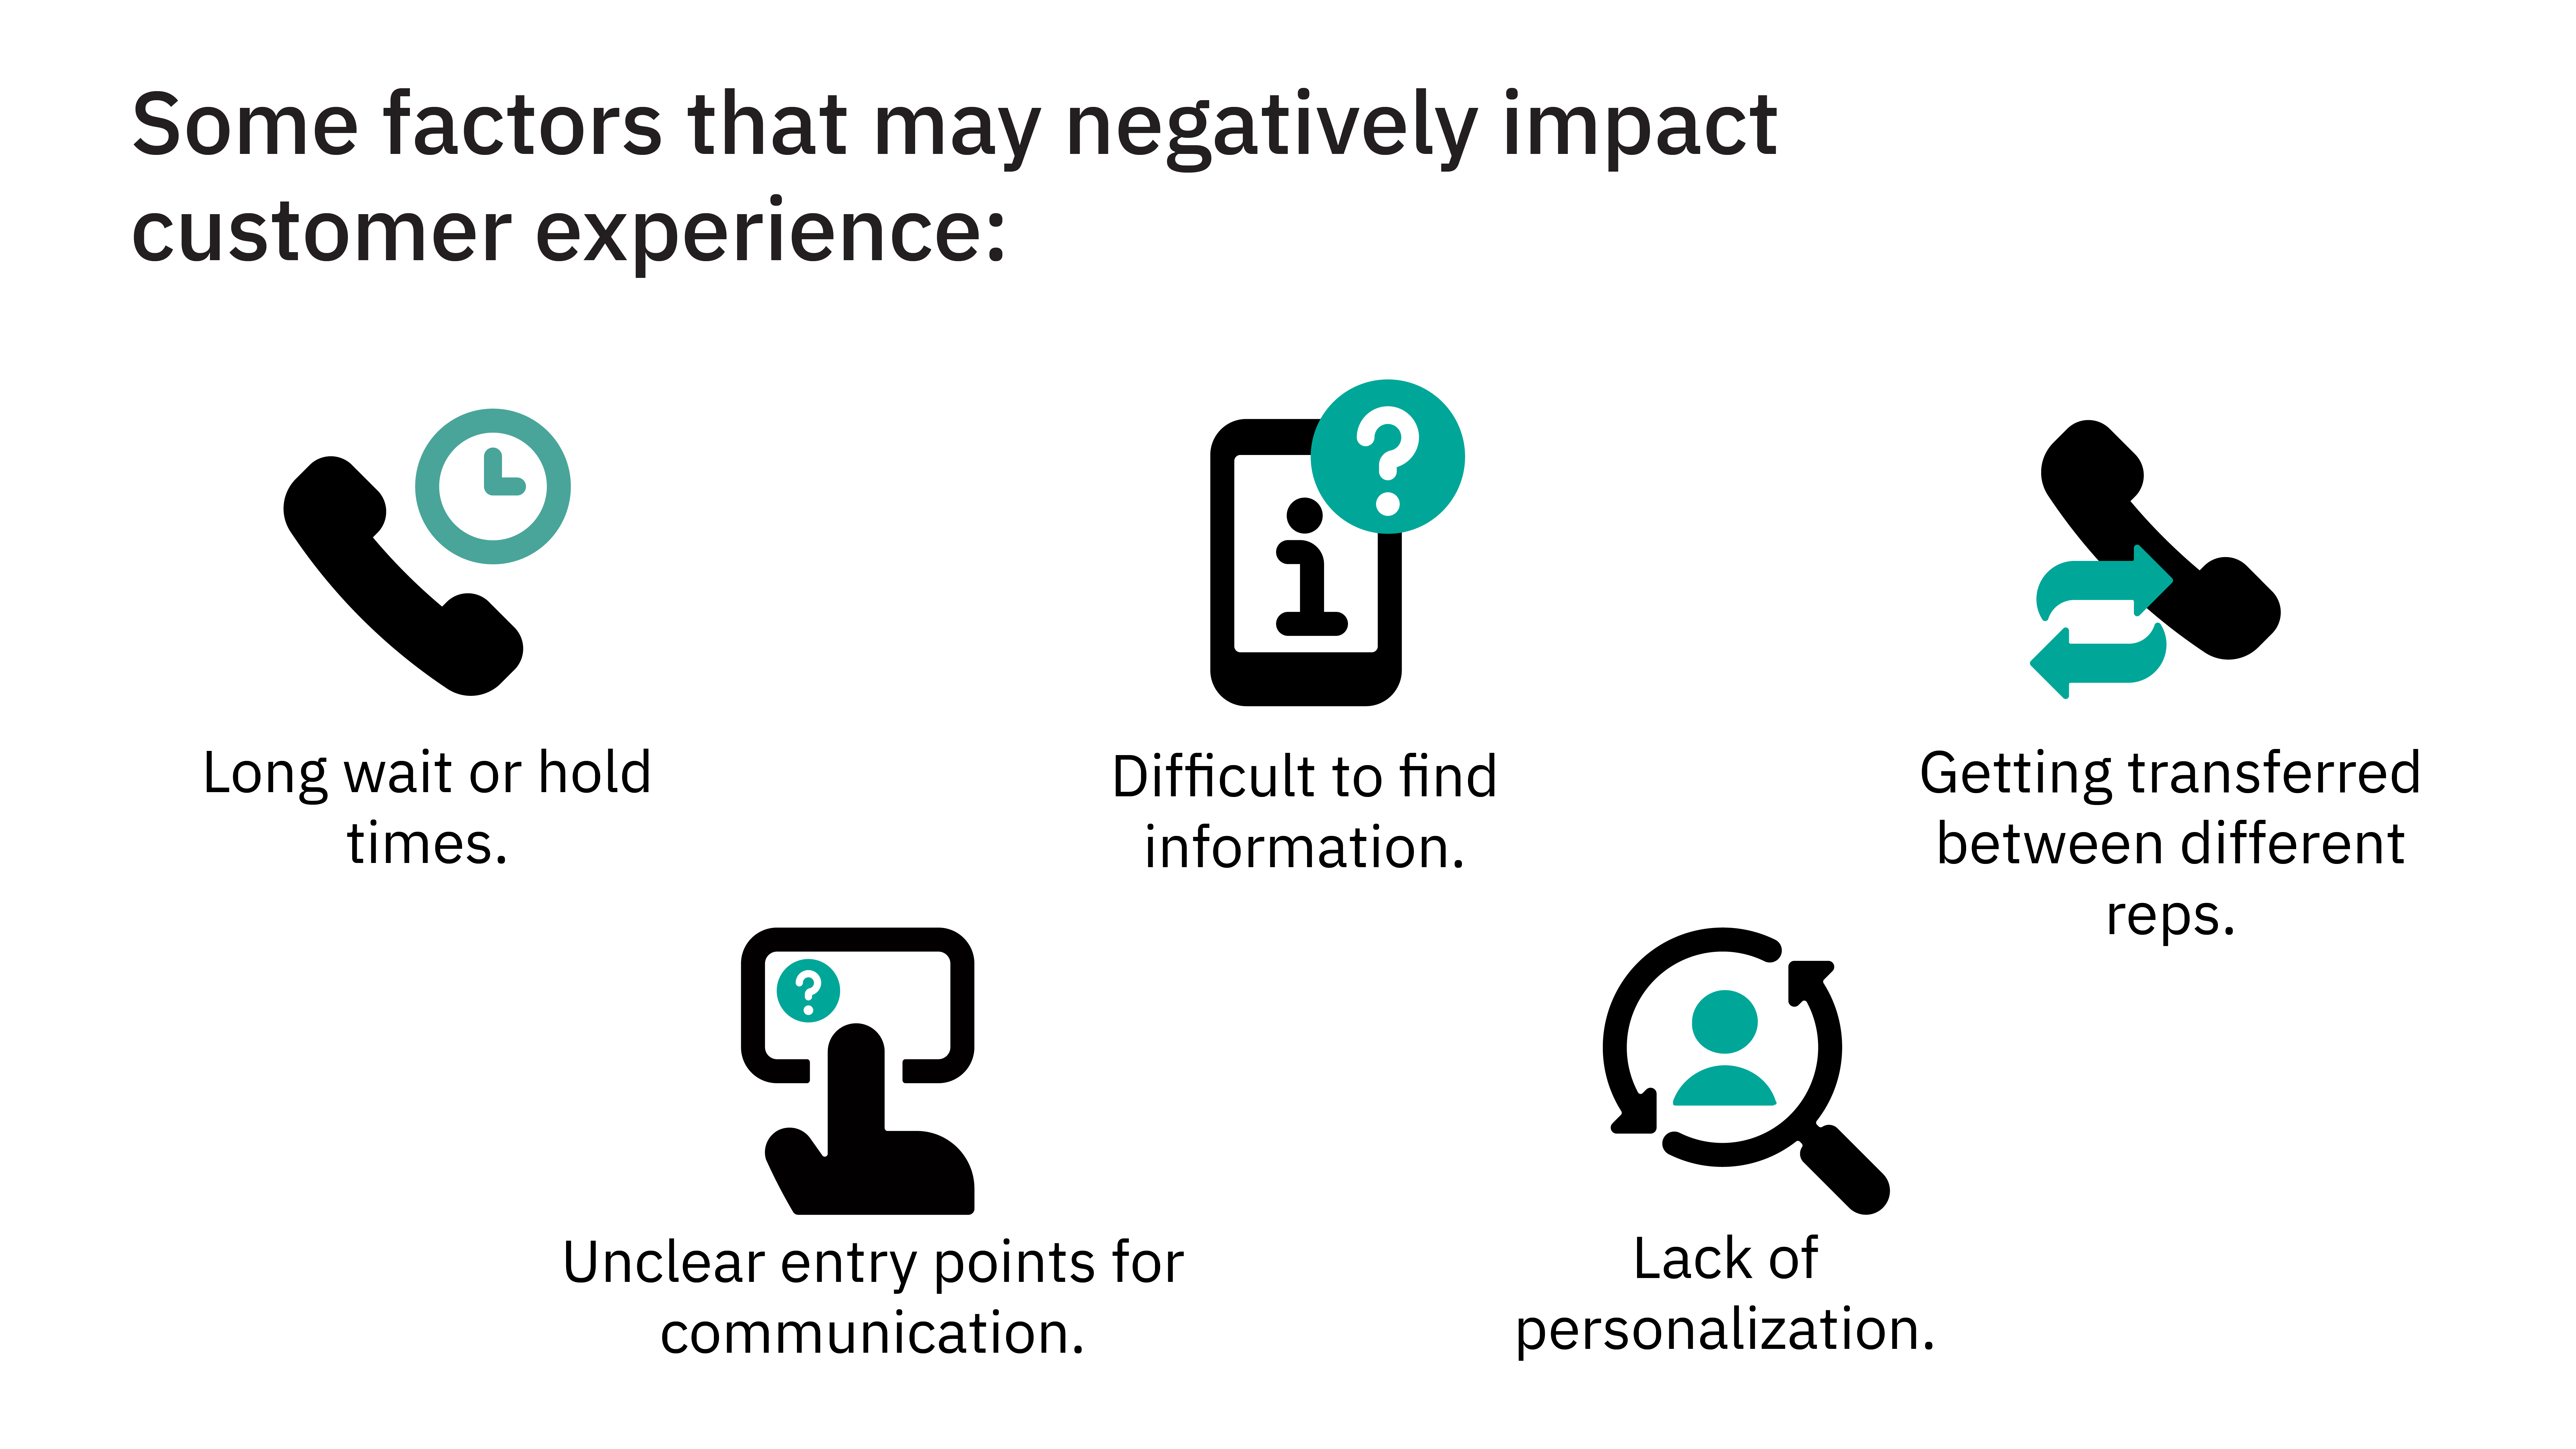 What factors negatively impact customer experience